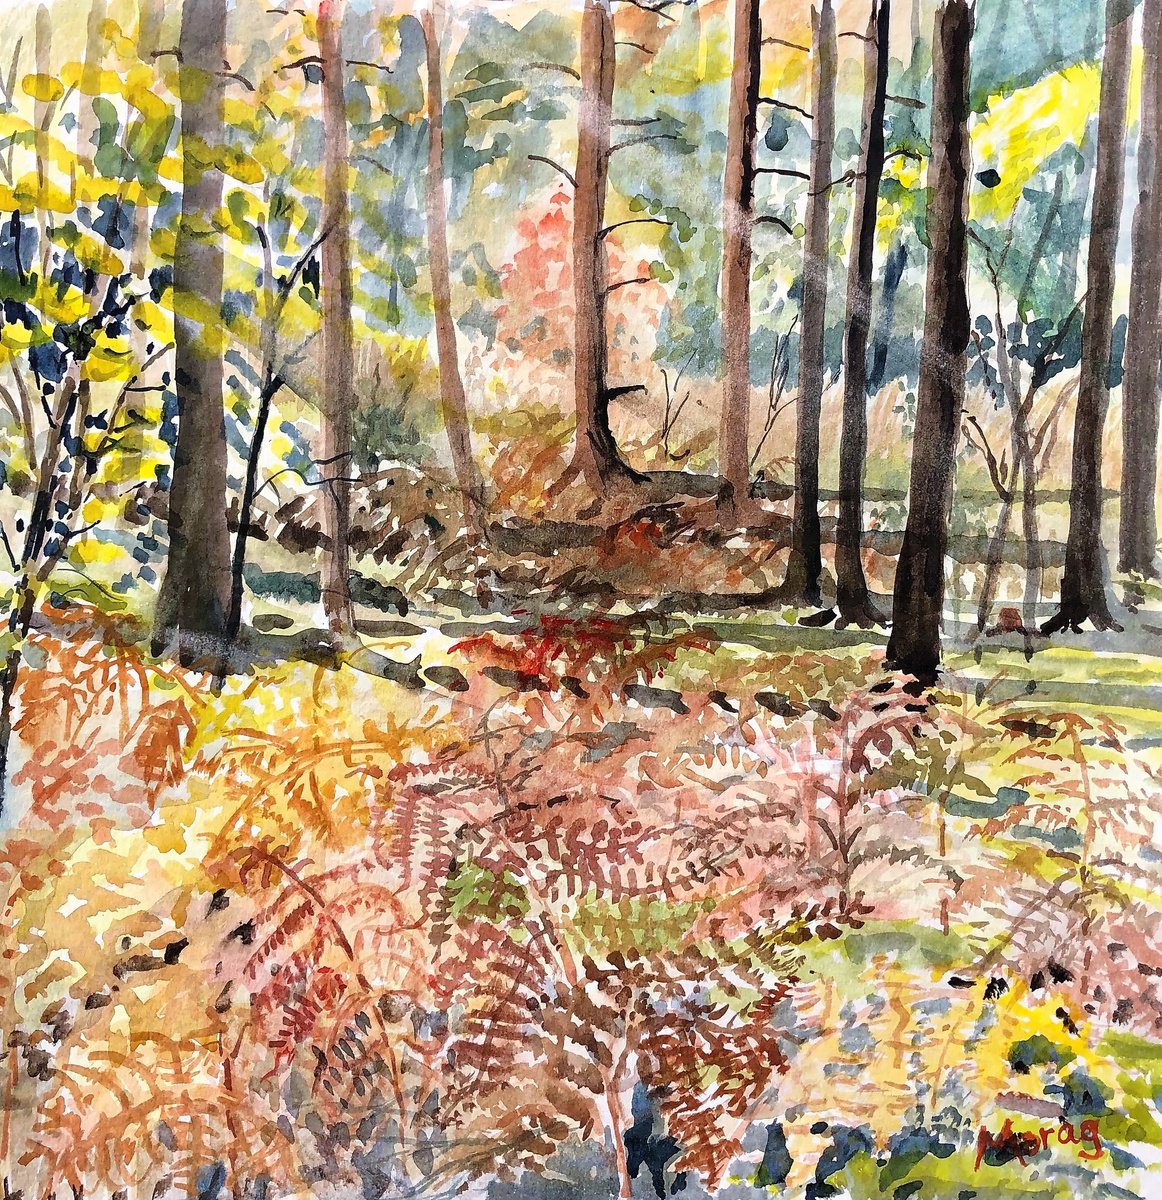 The Forest’s Ferny Floor by Morag Paul